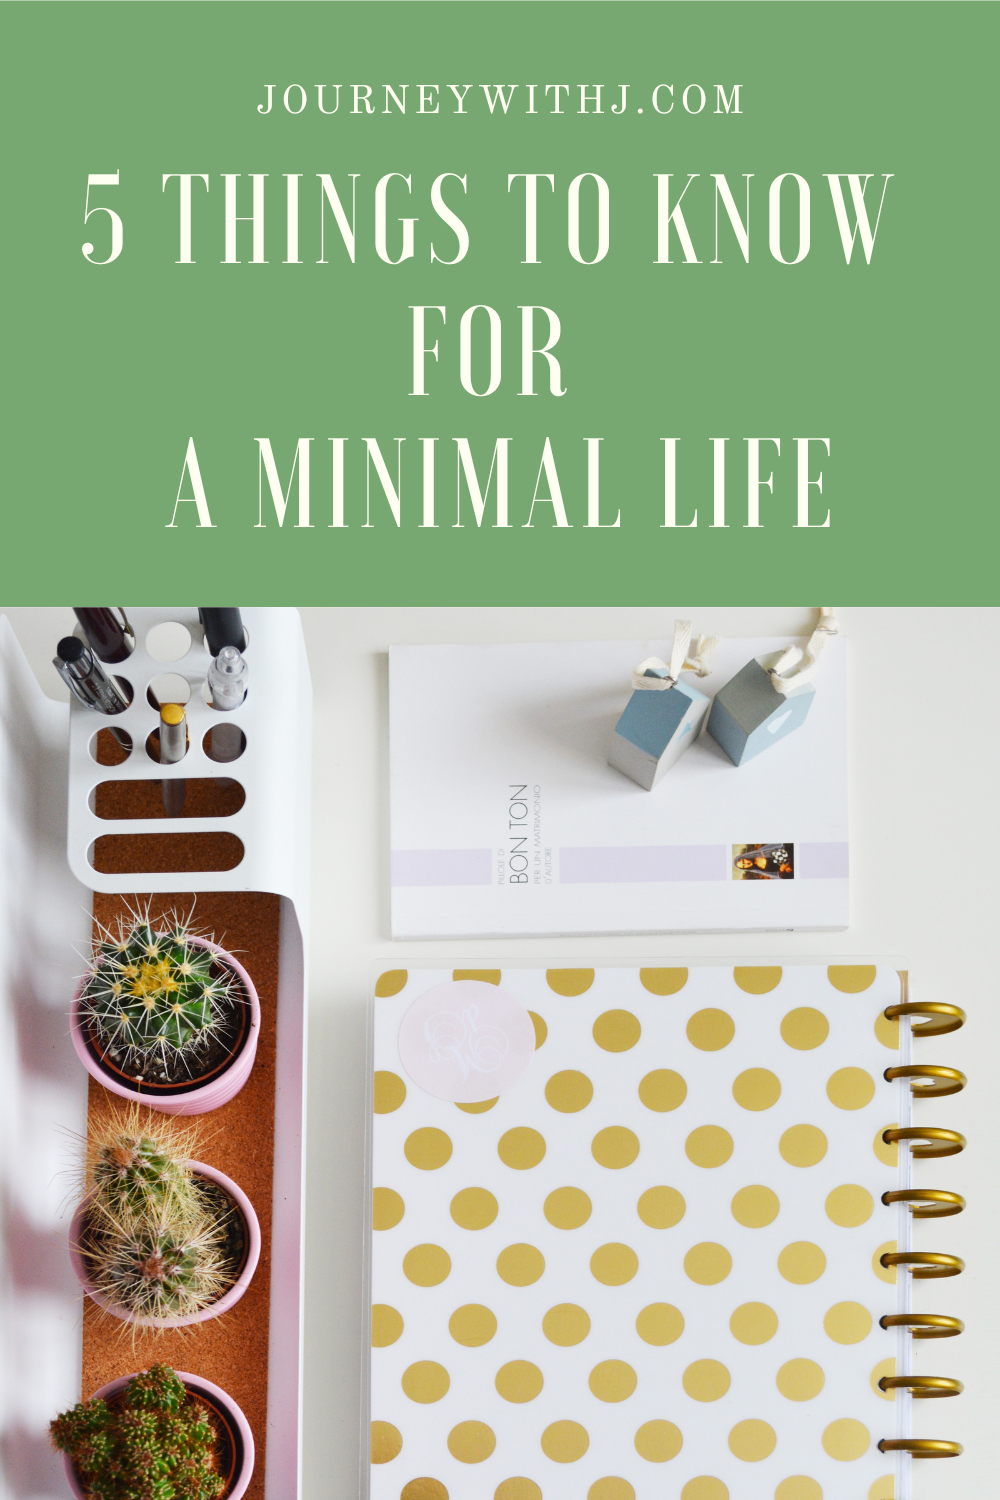 5 things to know for minimal life